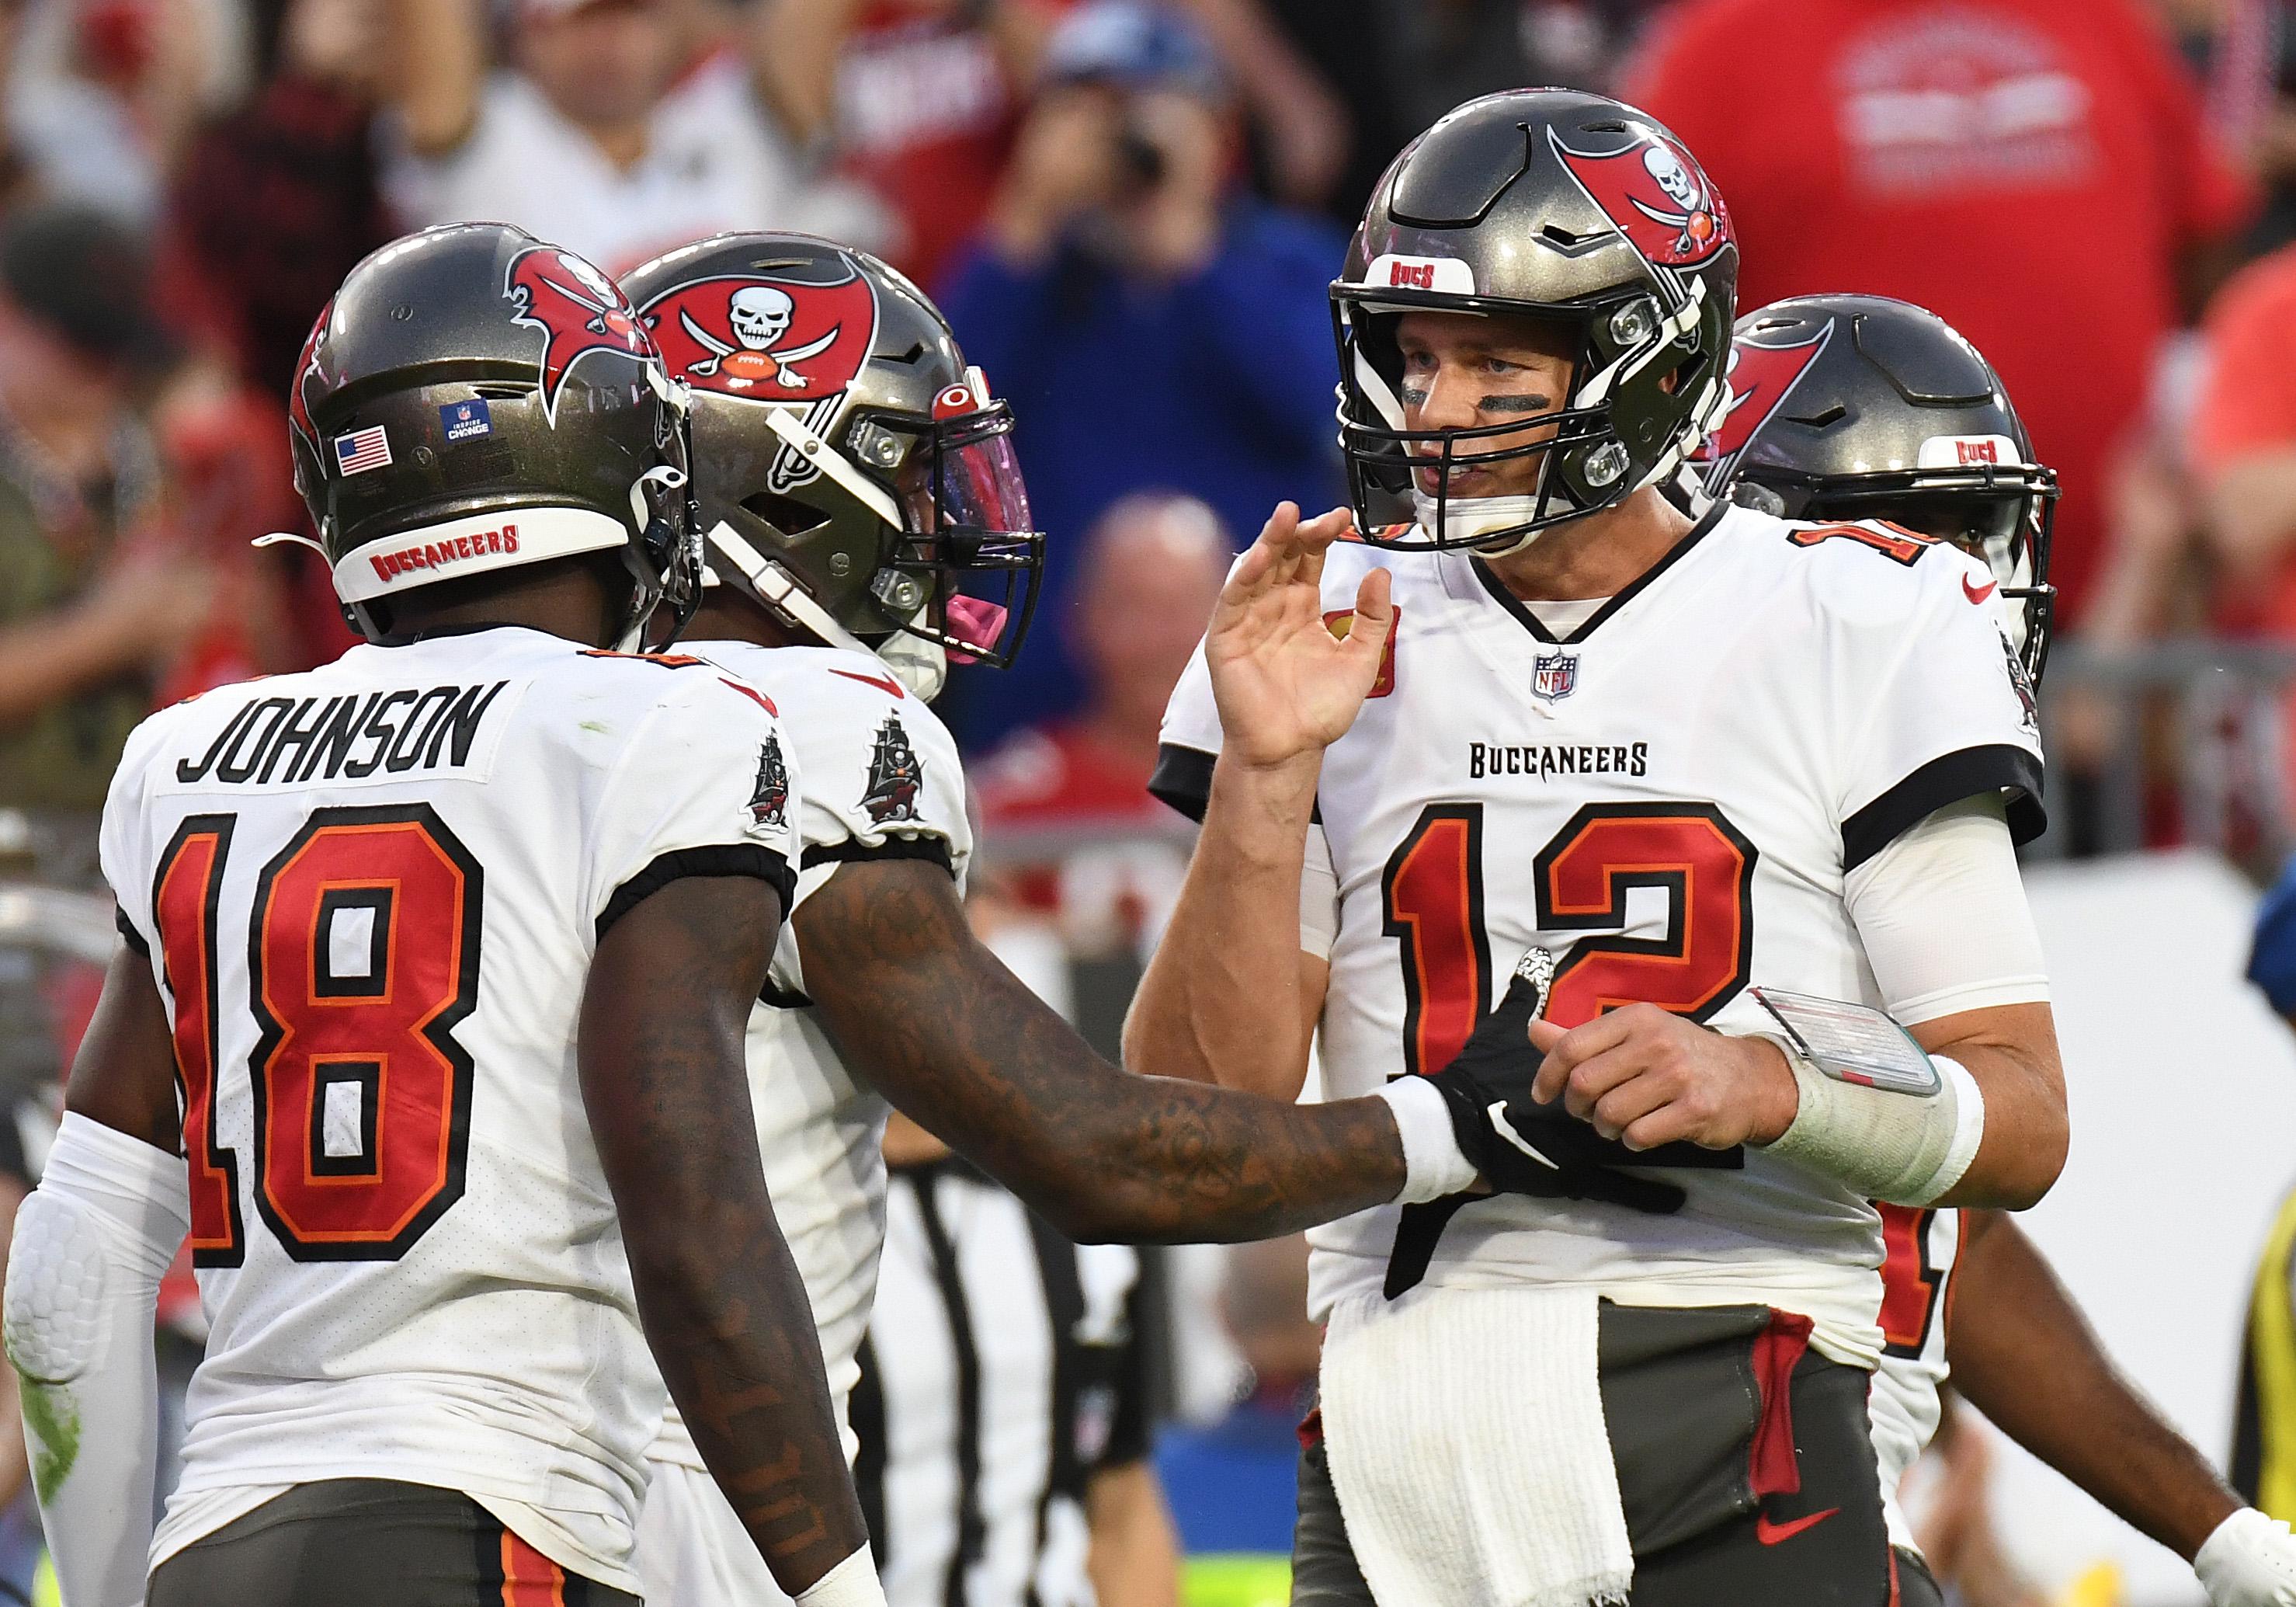 tampa bay buccaneers playoff schedule